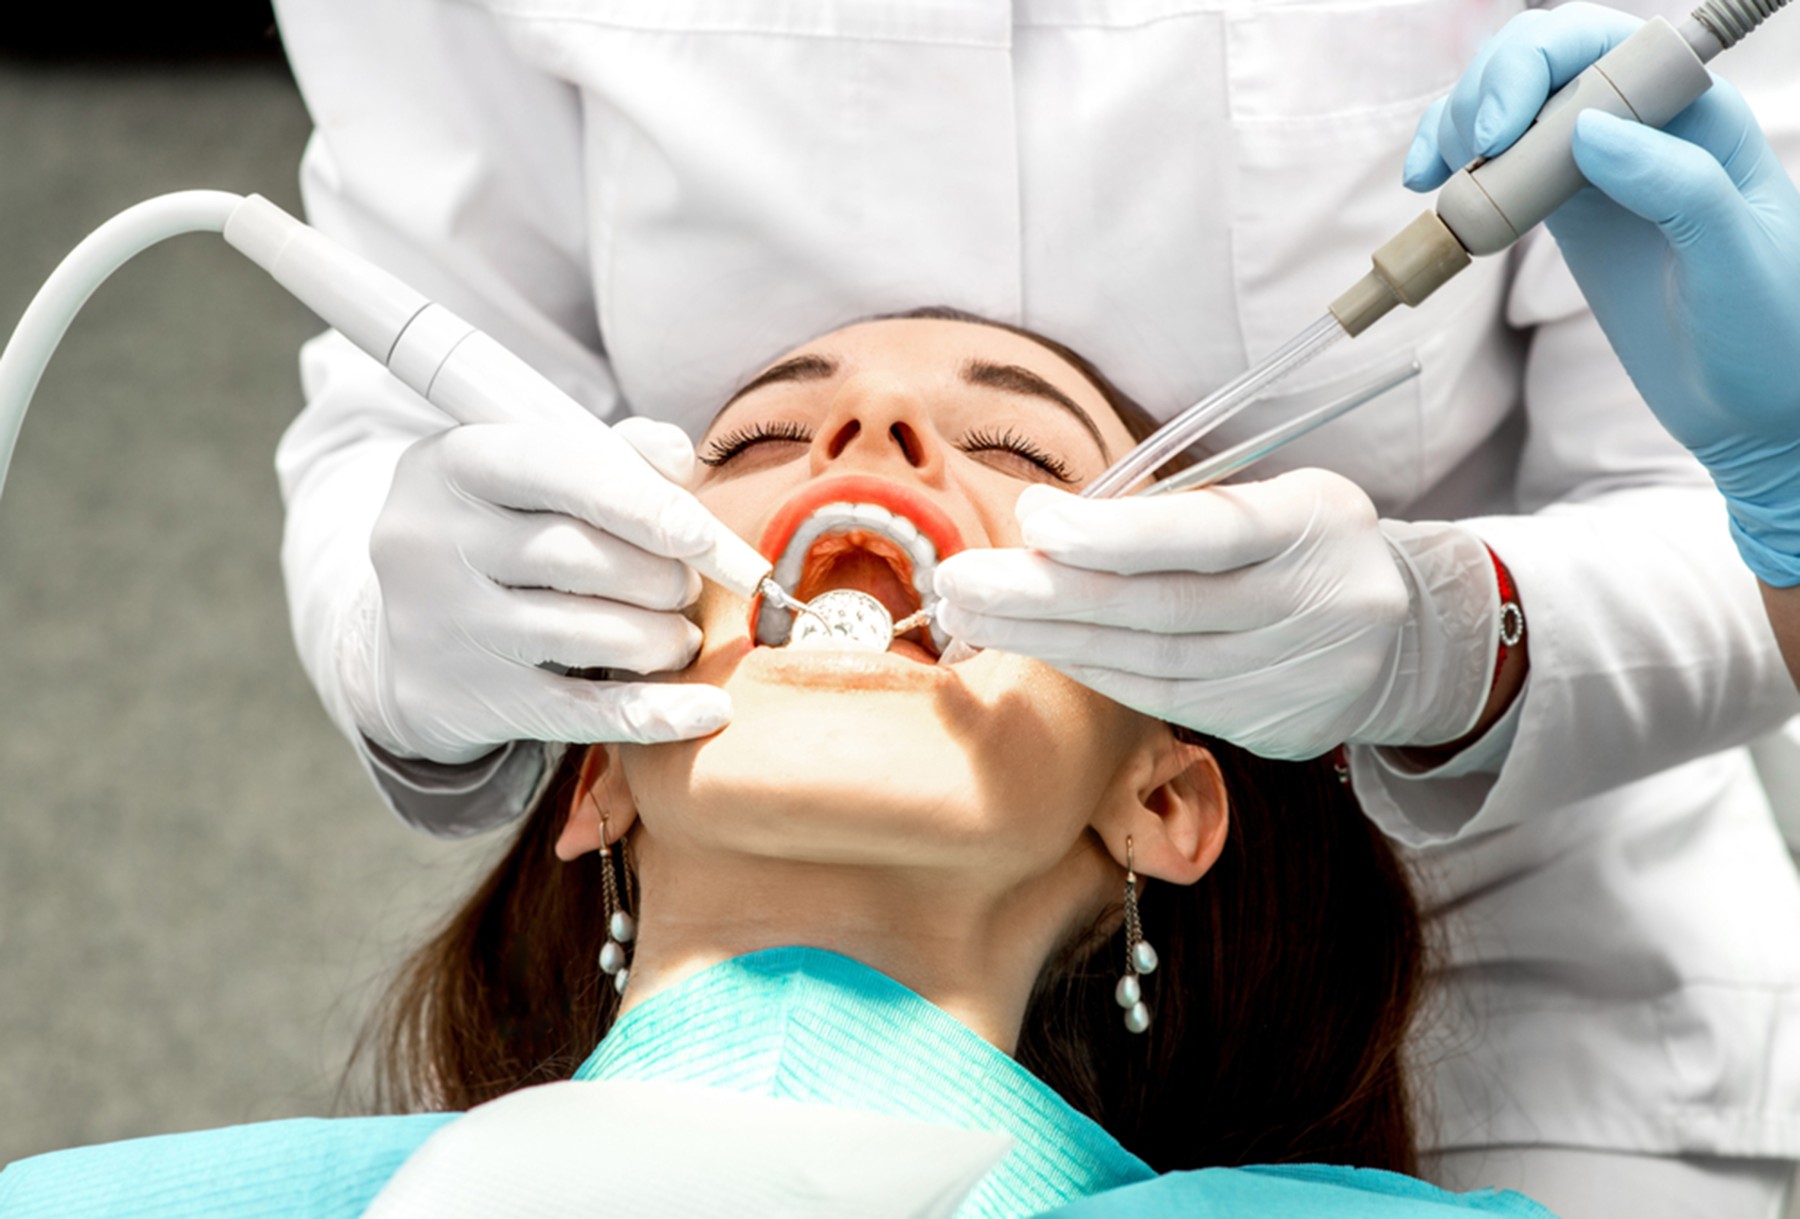 general facts on sedation dentistry